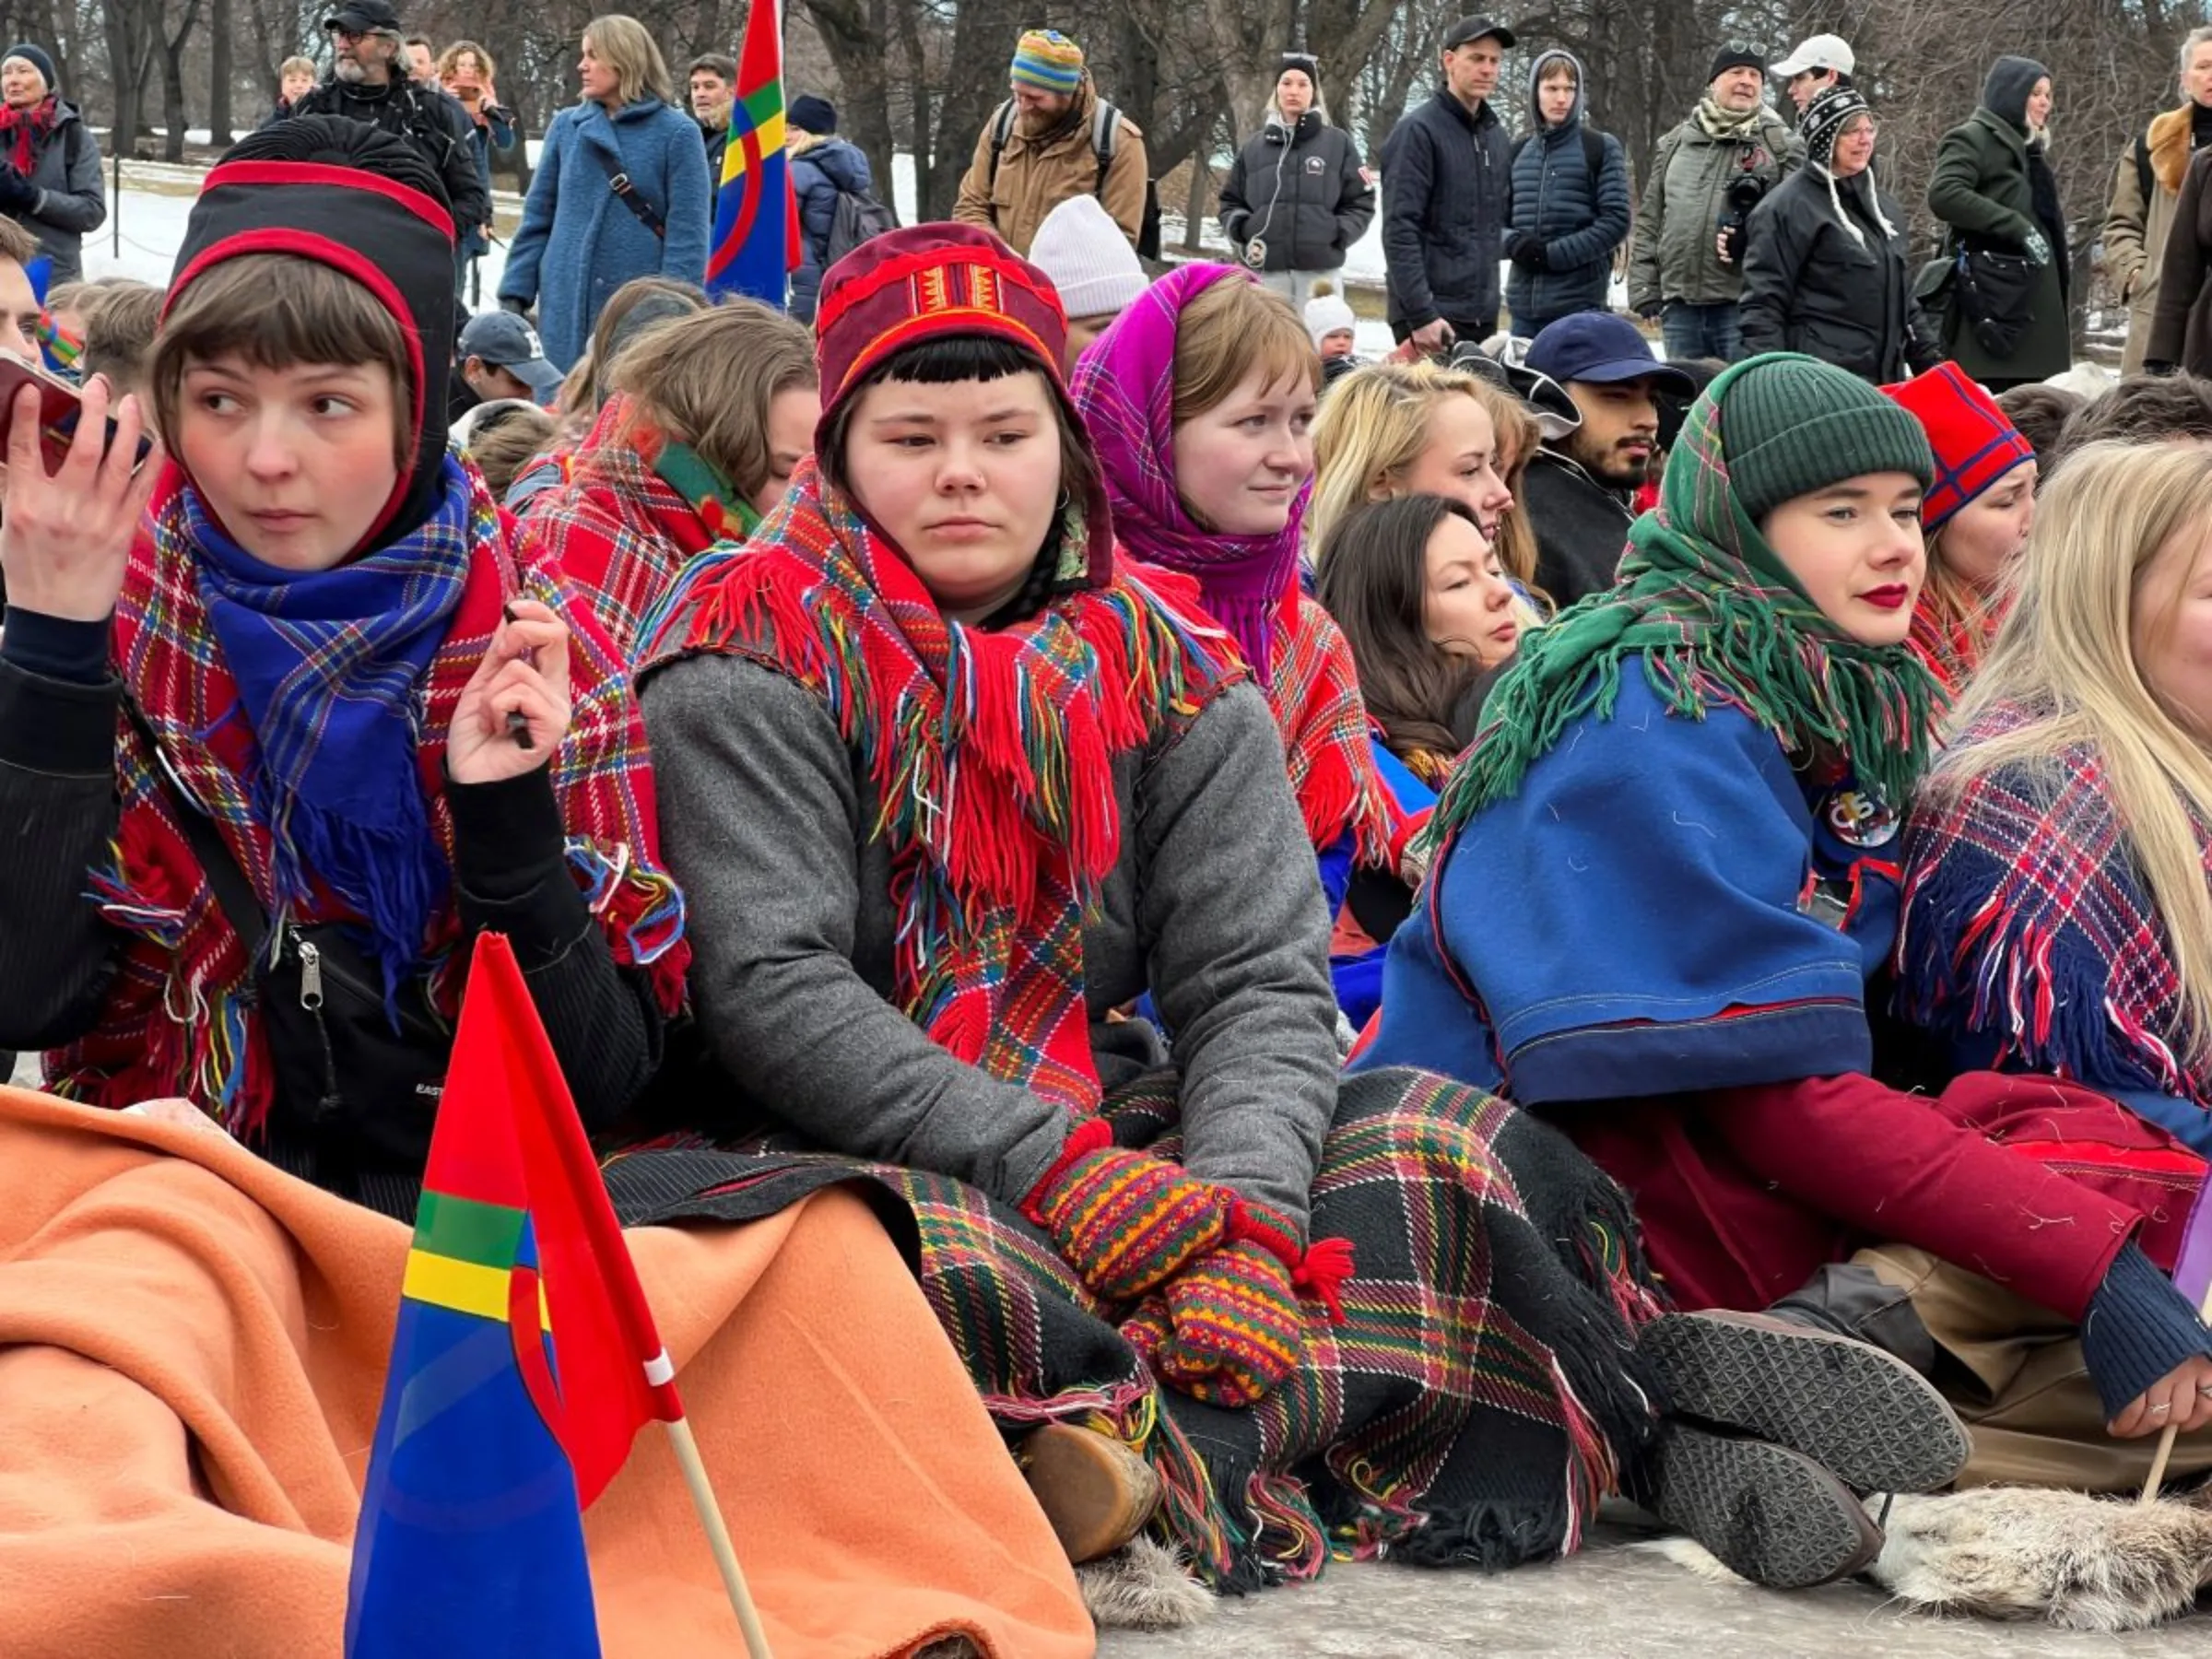 Protesters, including Sami people demonstrate against wind turbines at Fosen, in front of the royal palace in Oslo, Norway March 3, 2023. REUTERS/Victoria Klesty